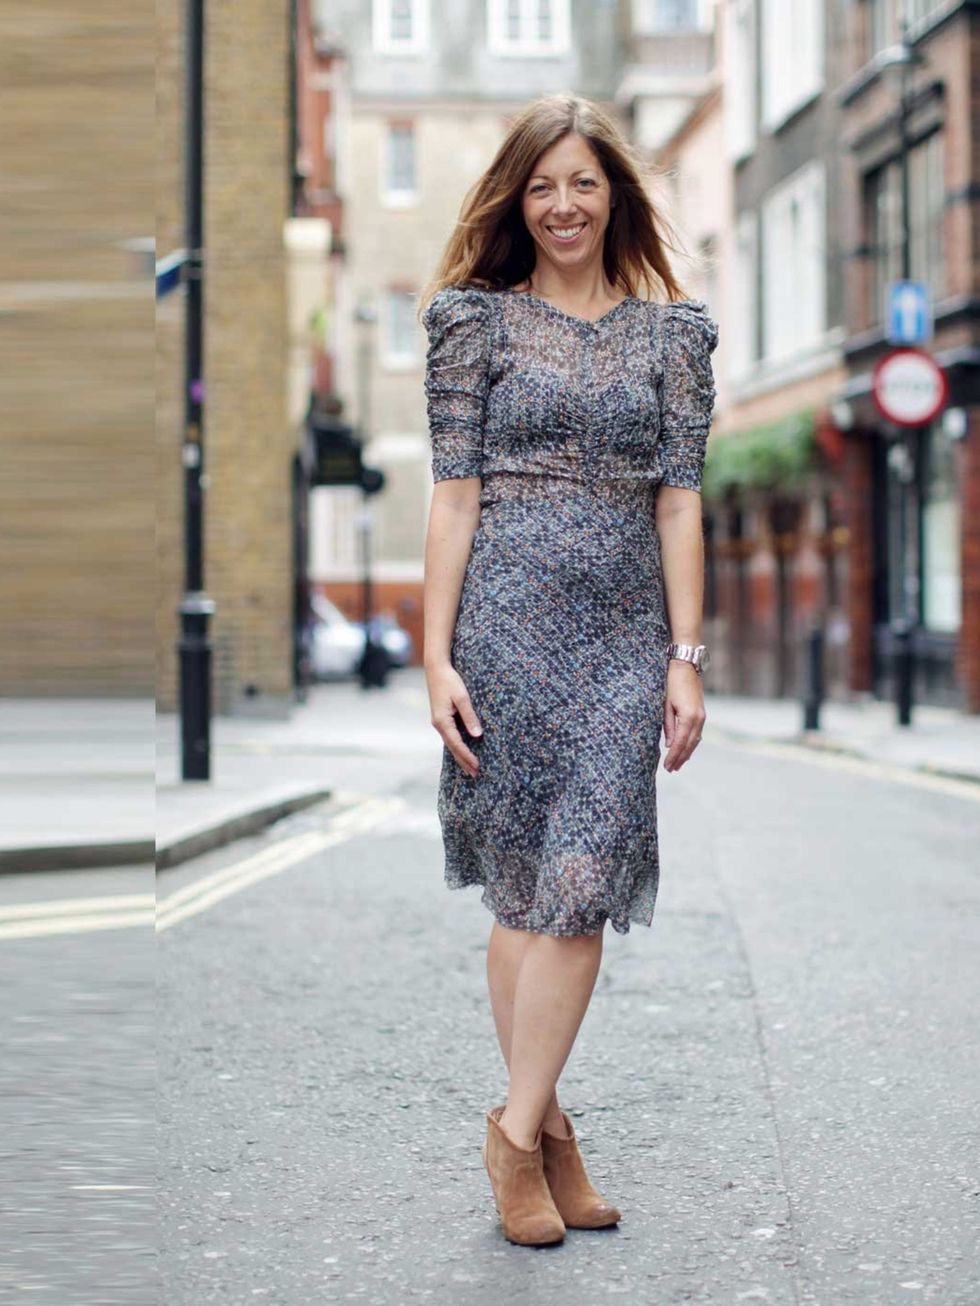 <p><strong>Kirsty Dale - Executive Fashion Director</strong></p><p>Wearing Isabel Marant for H&amp;M dress £69.99 and Report boots.</p><p><a href="http://www.elleuk.com/fashion/what-to-wear/isabel-marant-for-hm-lookbook-autumn-winter-2013"></a></p><p><a h